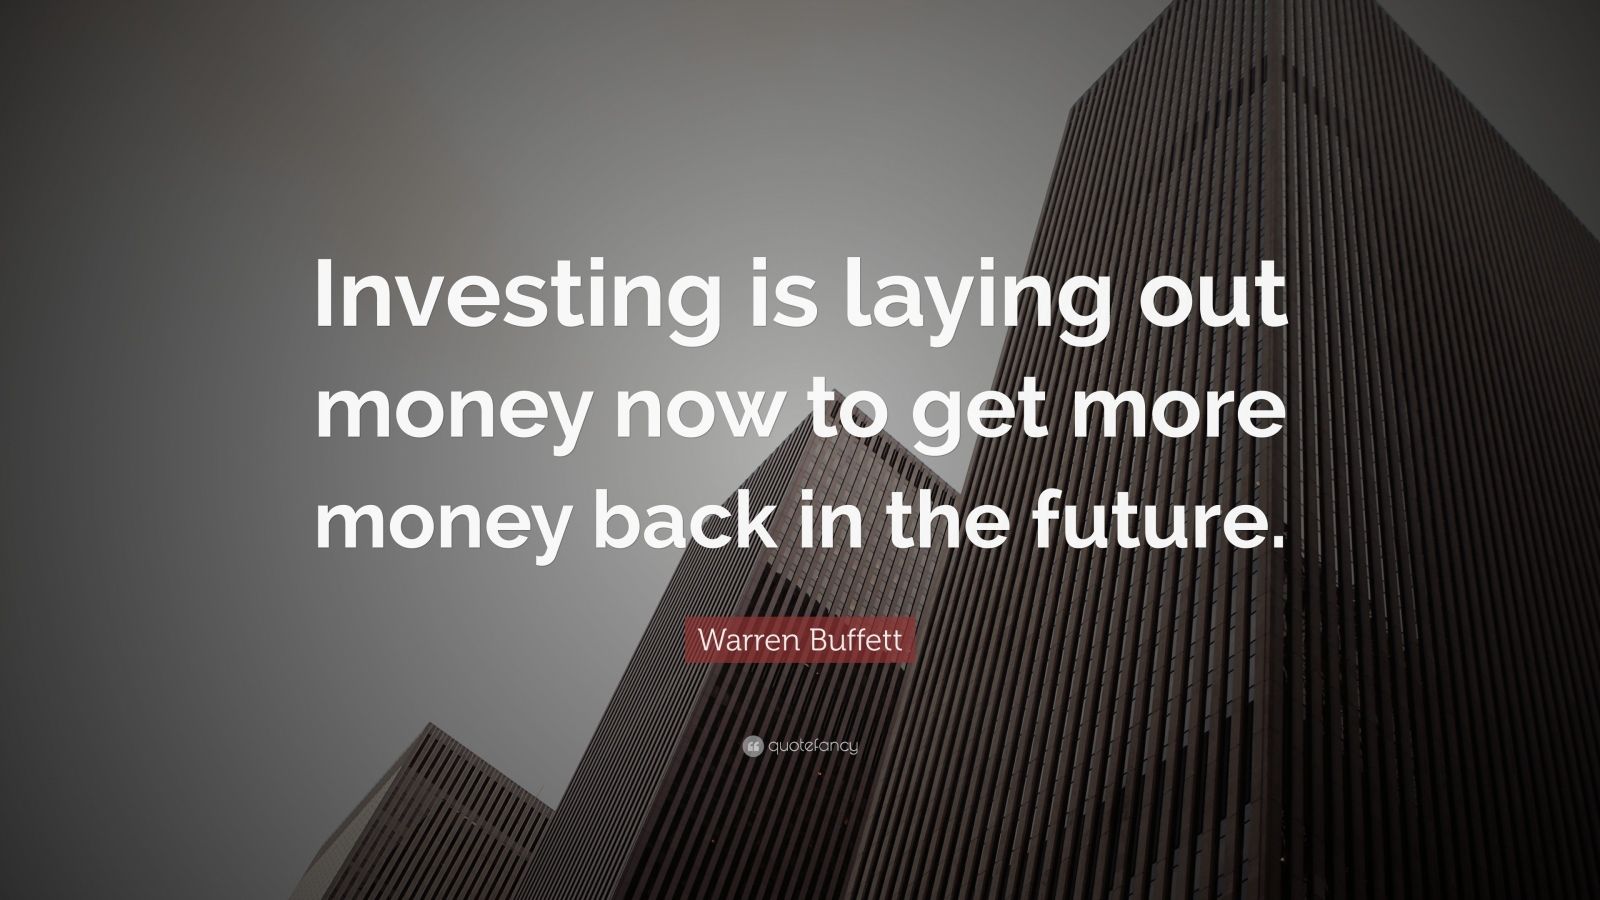 Warren Buffett Quote: “Investing is laying out money now to get more